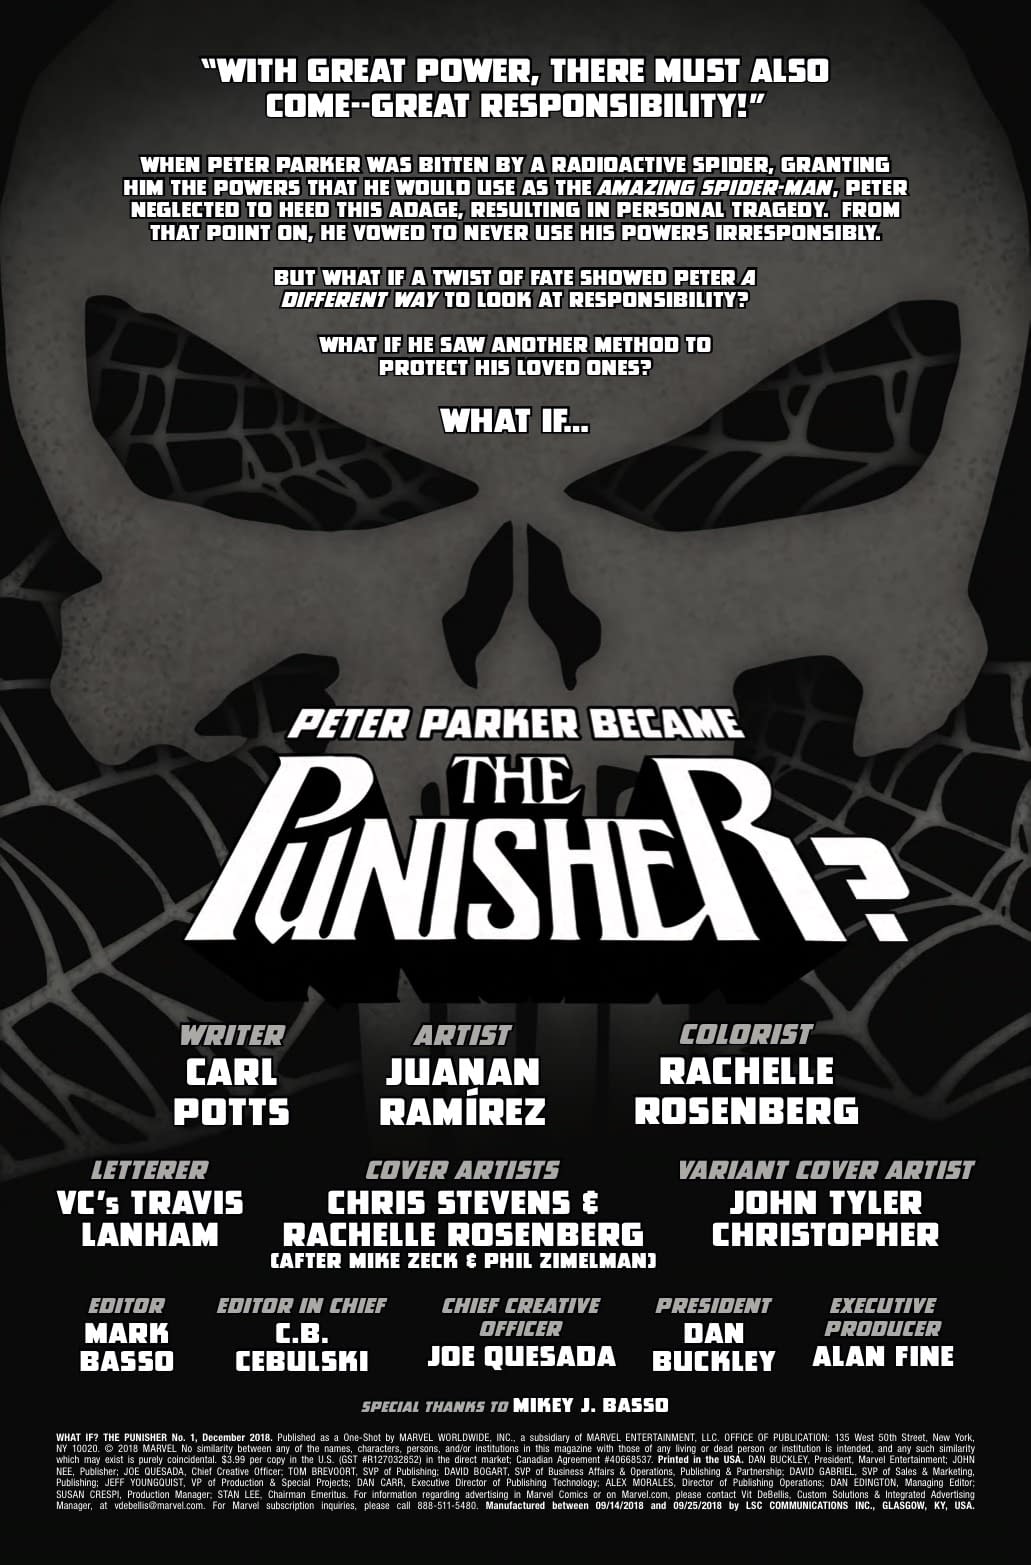 Is What If? Punisher Basically the Snyder Cut of Spider-Man?